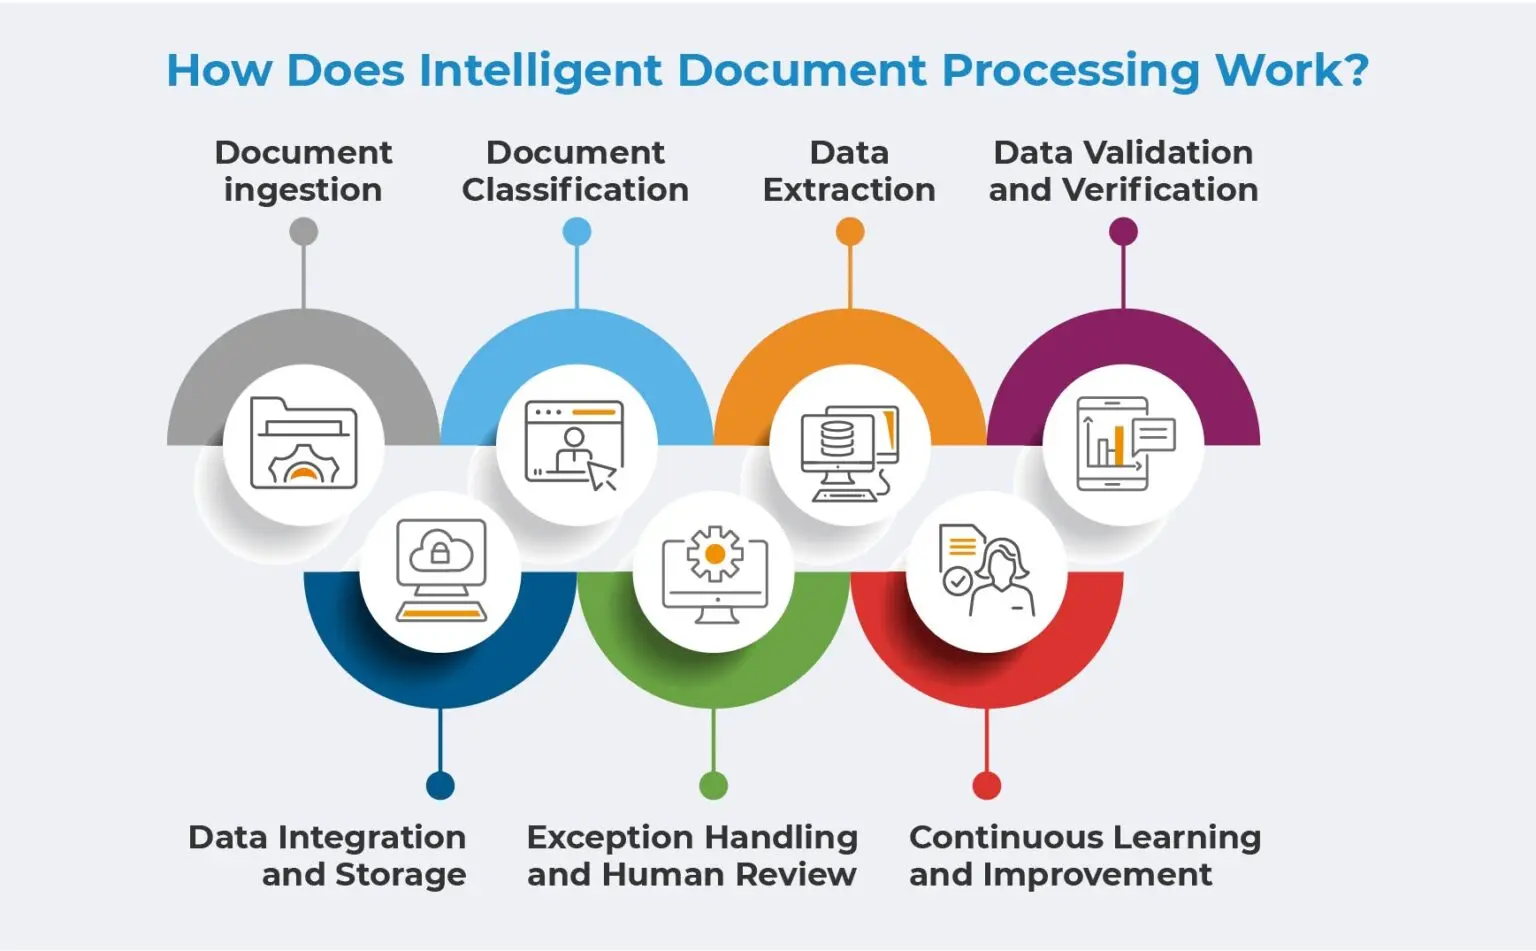 How Does Intelligent Document Processing Work?